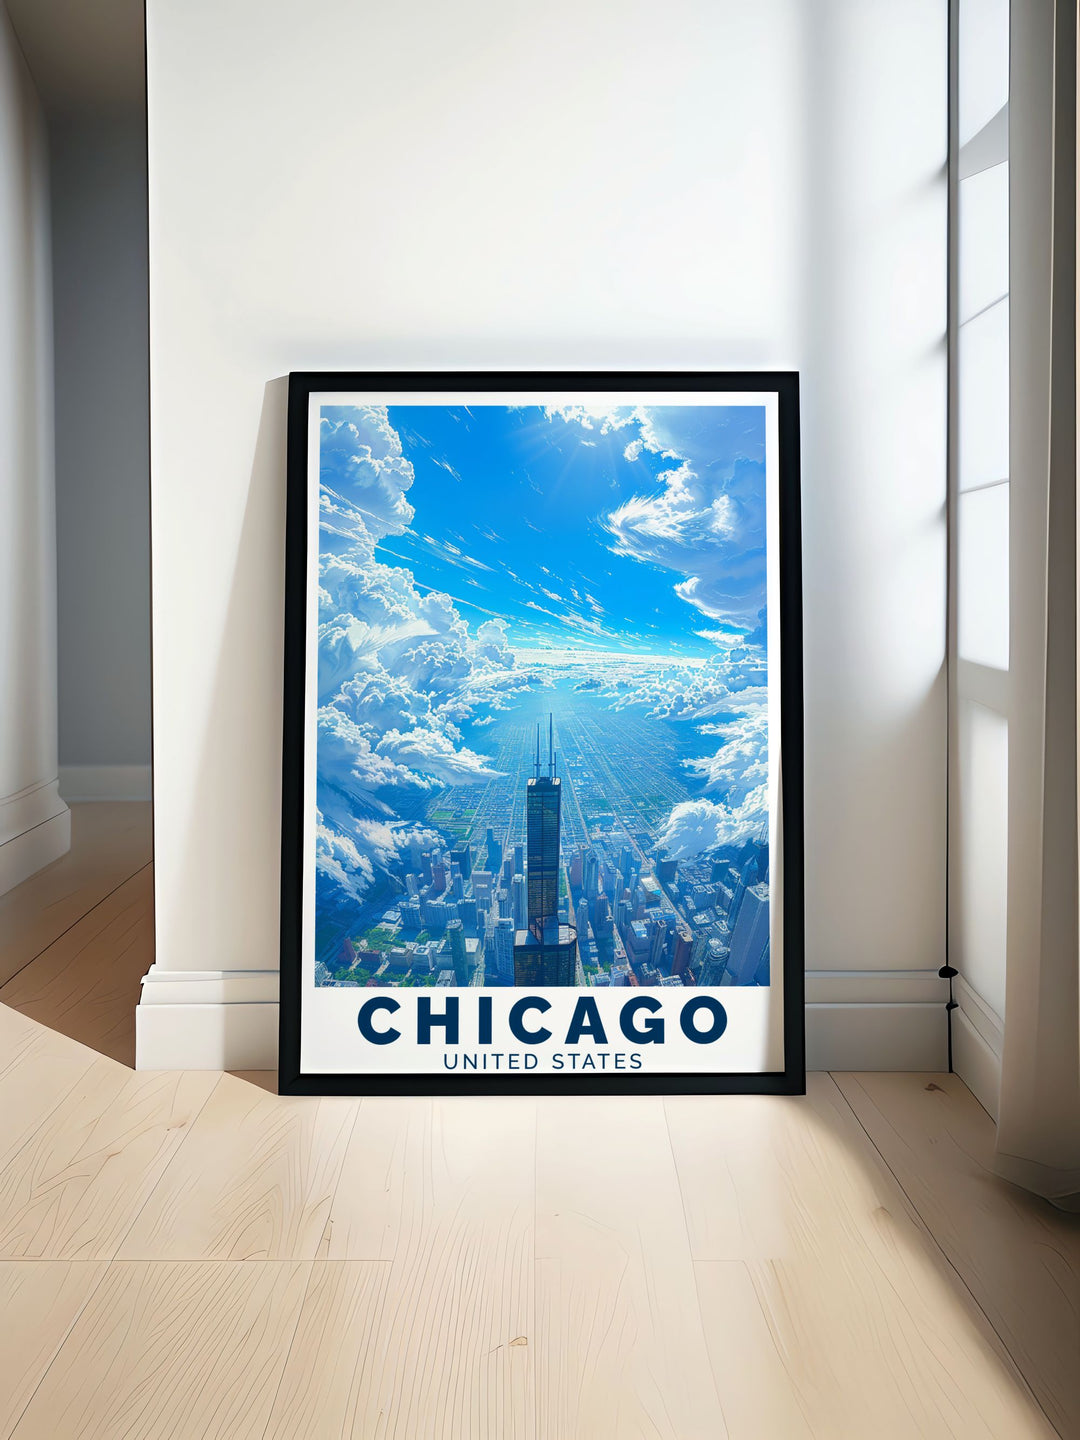 A vibrant Chicago skyline poster featuring Willis Tower in the background perfect for adding a touch of city charm to your home decor and making a unique Chicago gift with a detailed city map and vintage style.